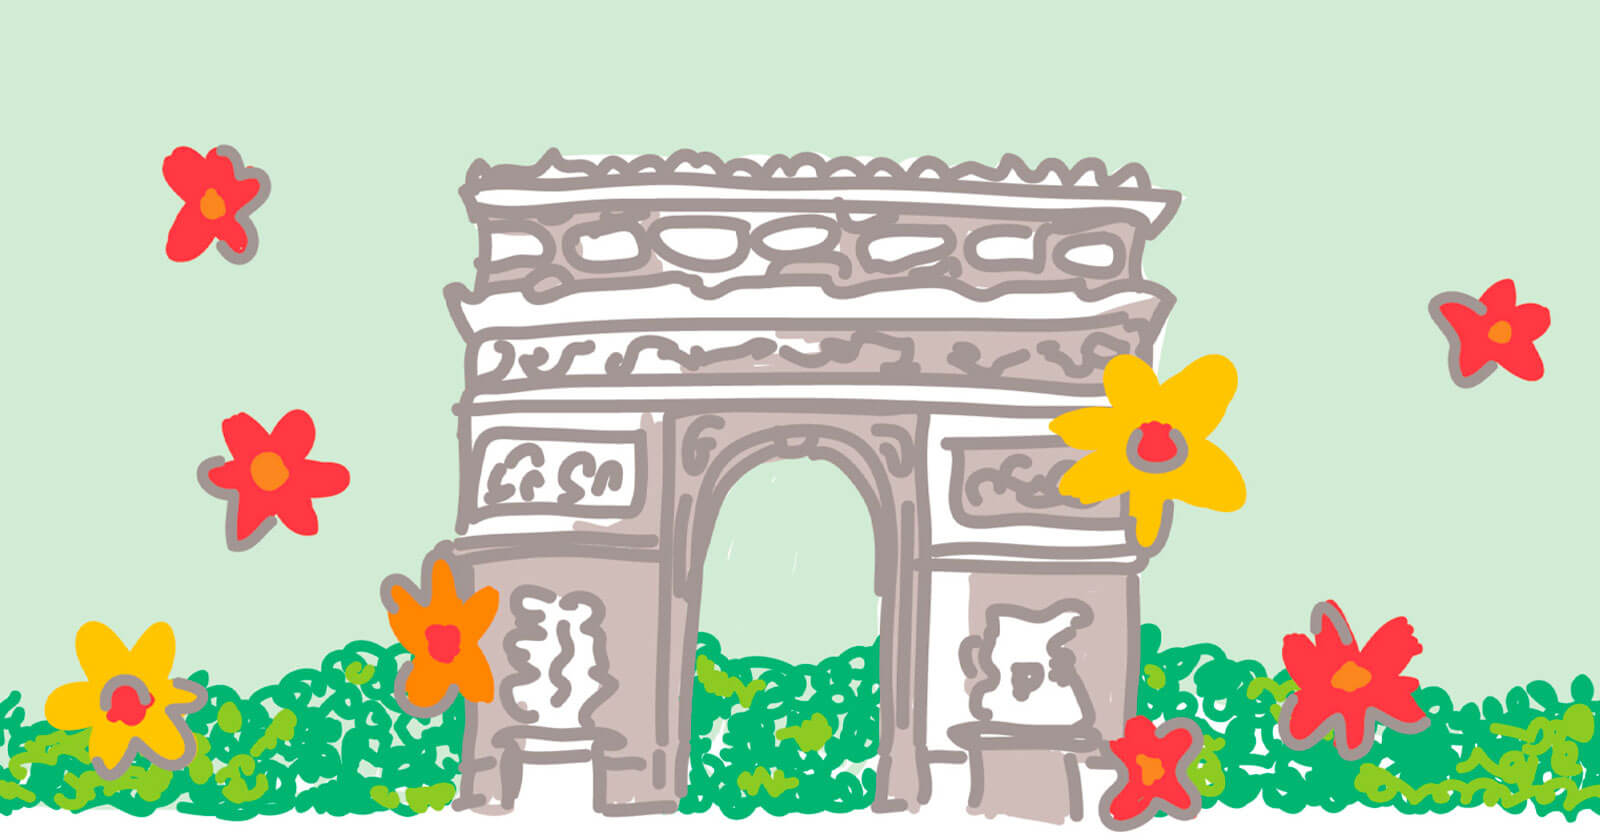 Illustrated Champs-Élysées surrounded by flowers and greenery